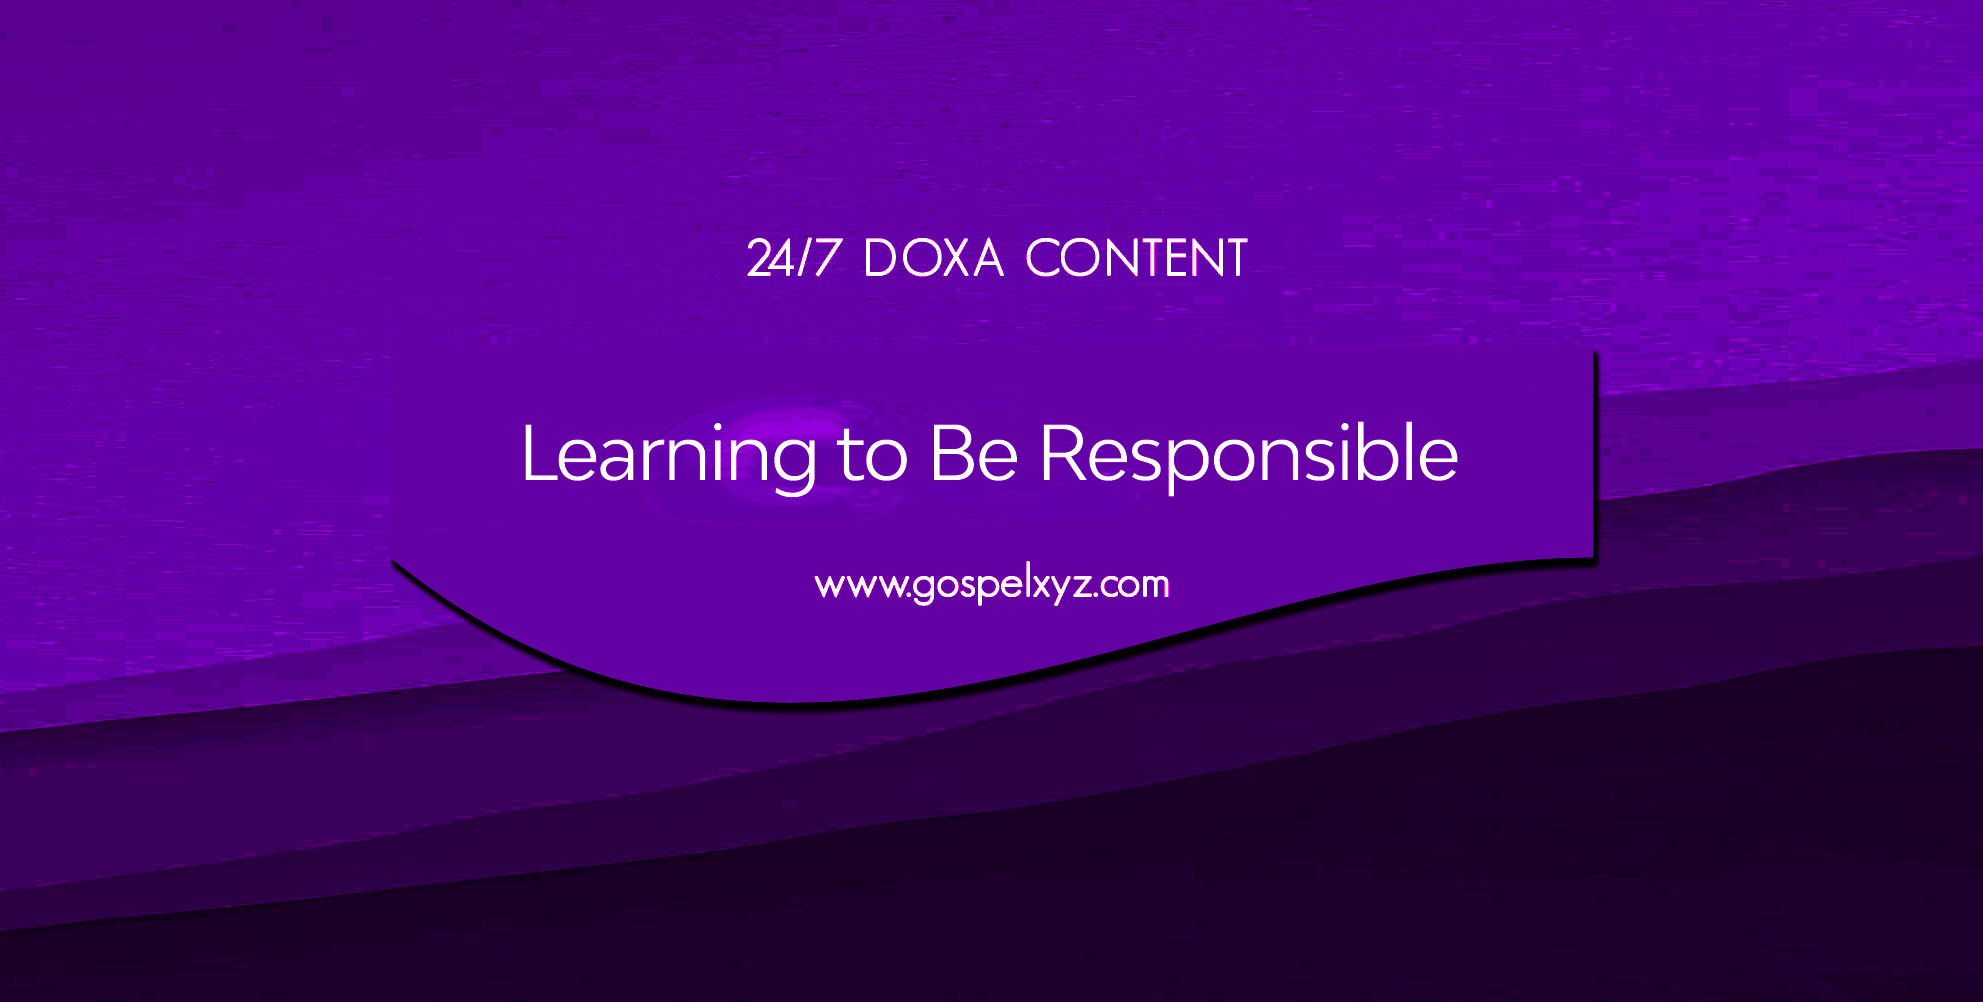 24/7 DOXA Content, 29th August-LEARNING TO BE SELF-RESPONSIBLE